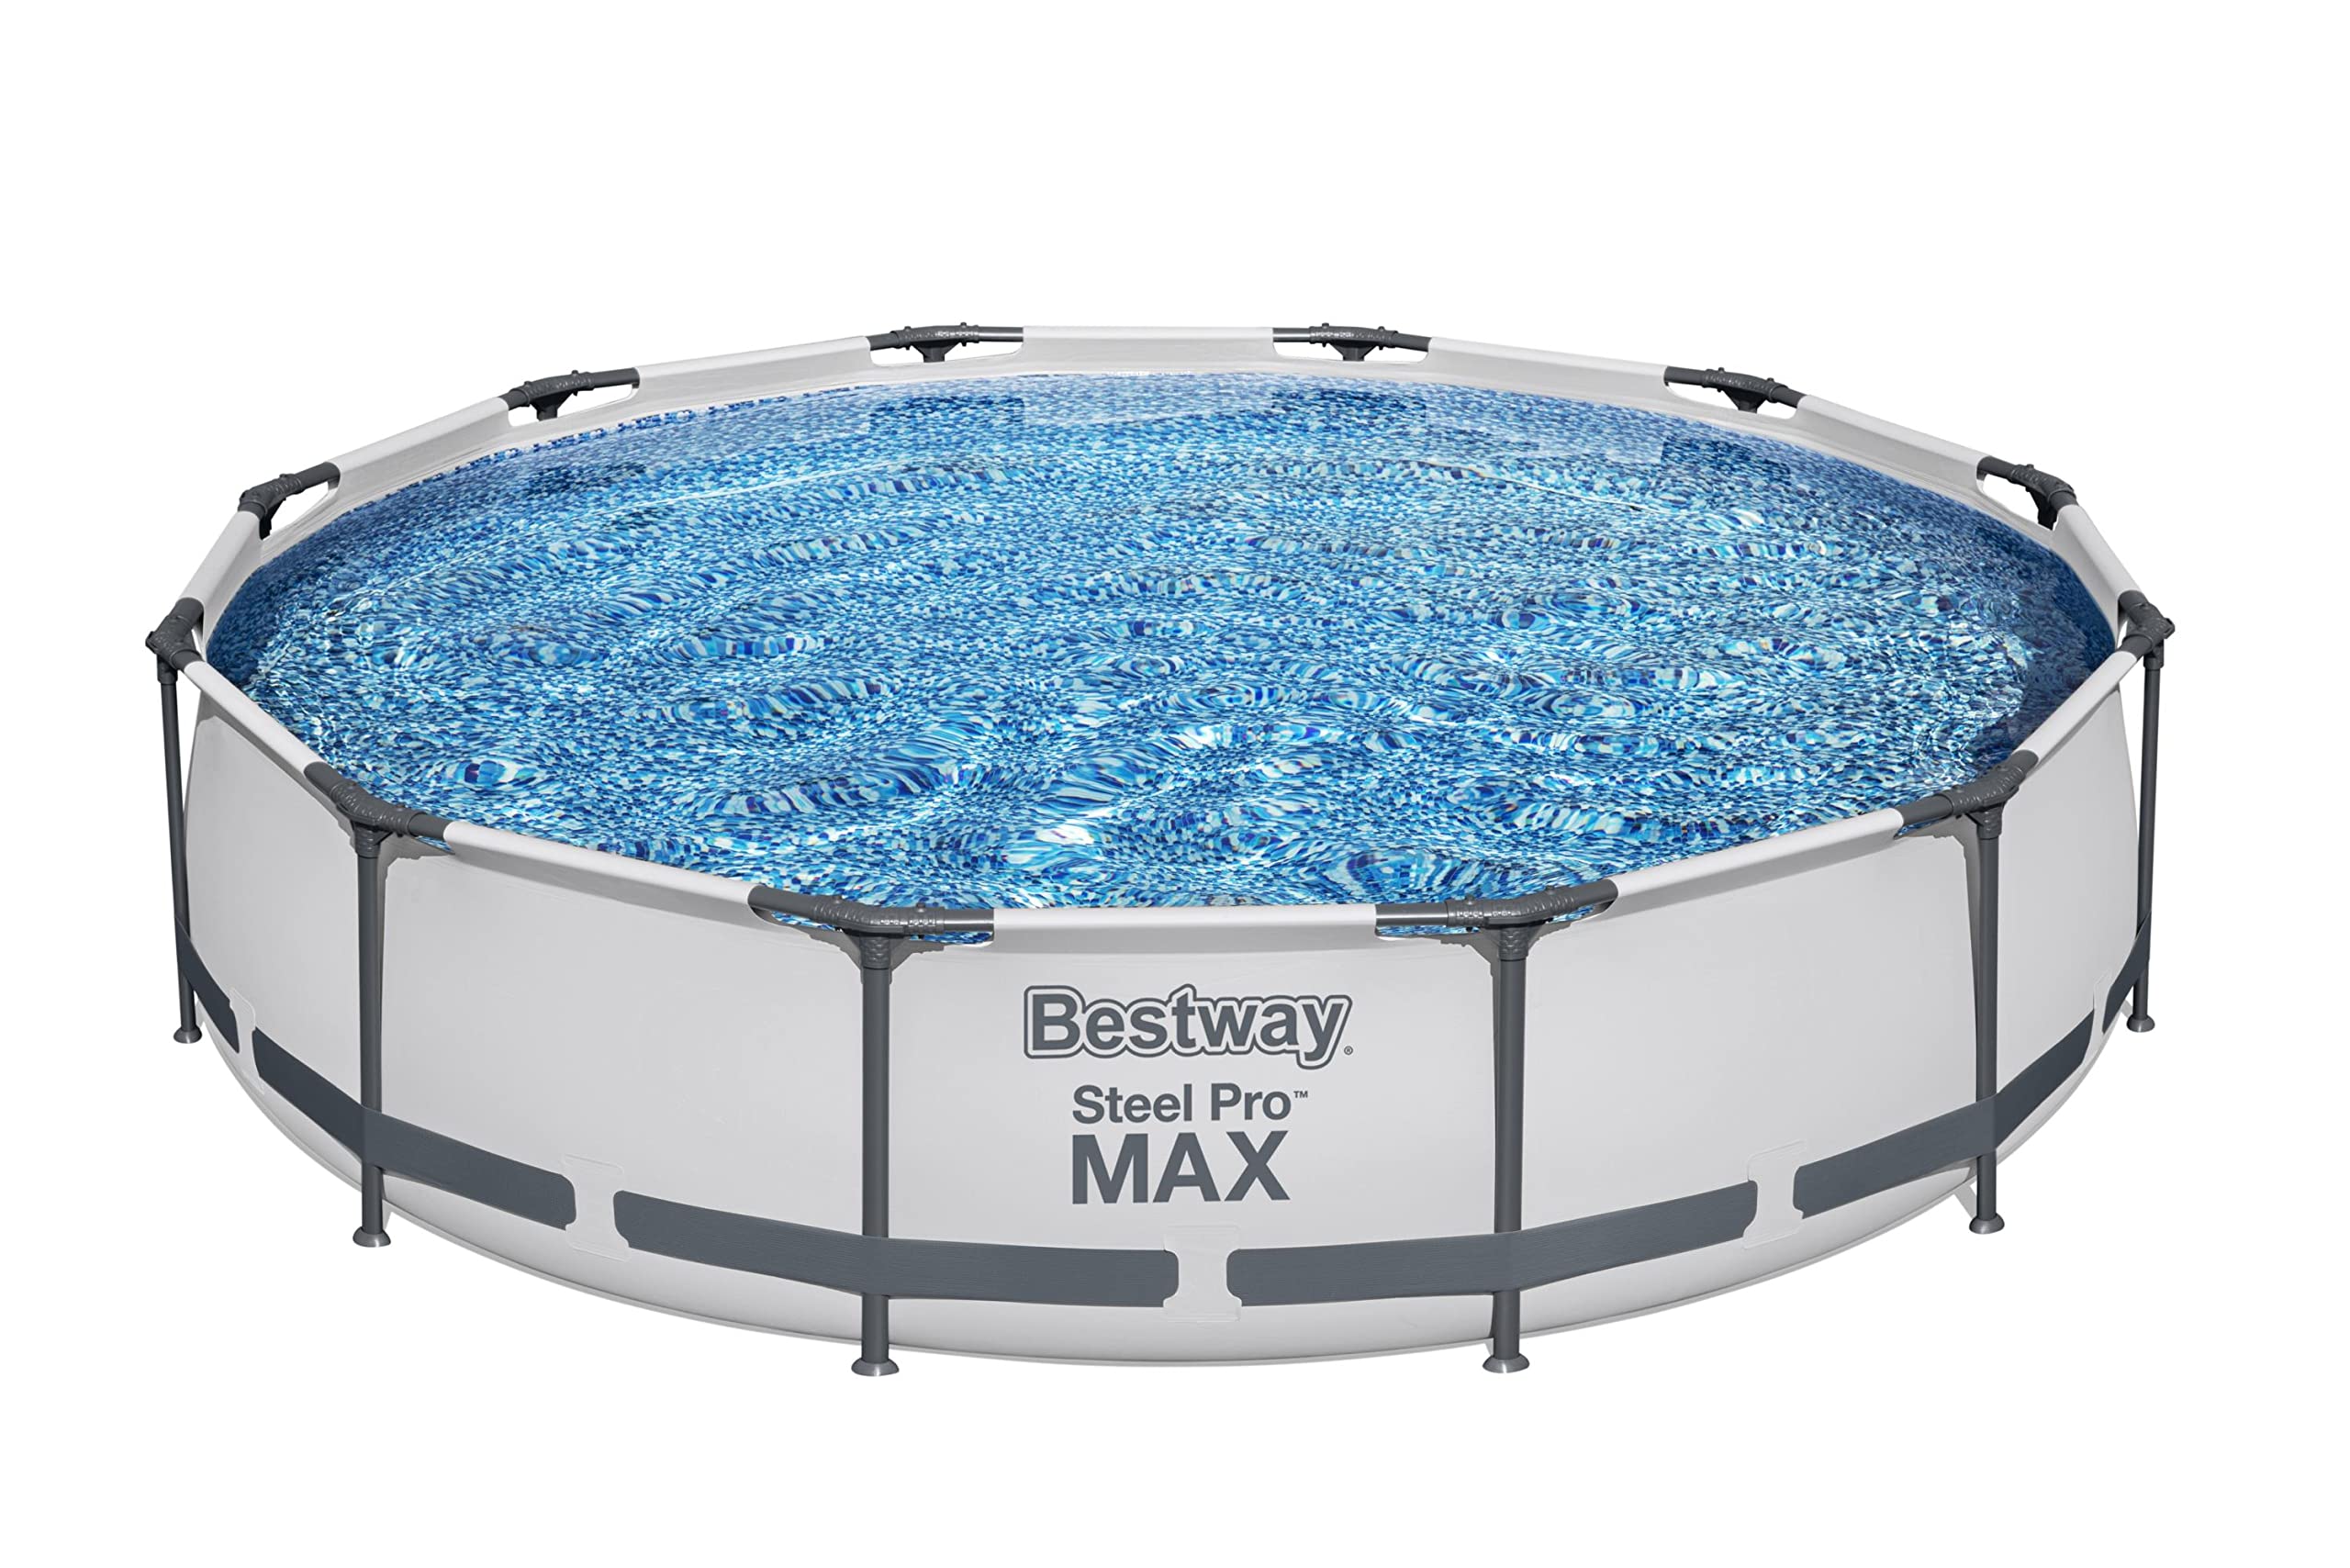 Bestway Steel Pro MAX 12 Foot x 30 Inch Round Metal Frame Above Ground Outdoor Backyard Swimming Pool Set with 330 GPH Filter